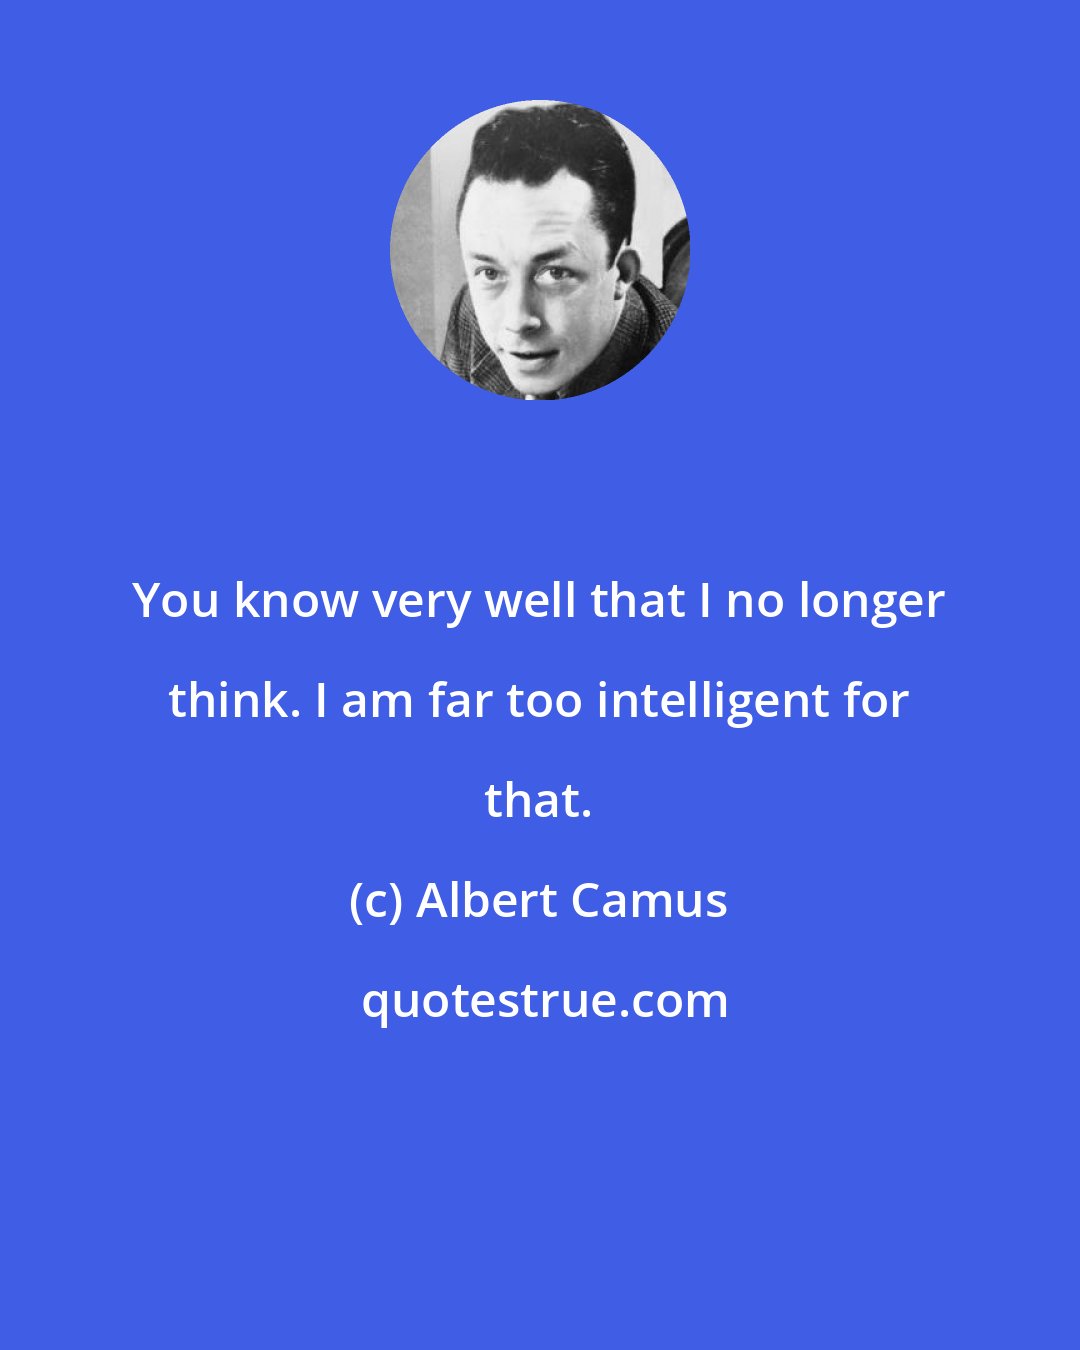 Albert Camus: You know very well that I no longer think. I am far too intelligent for that.